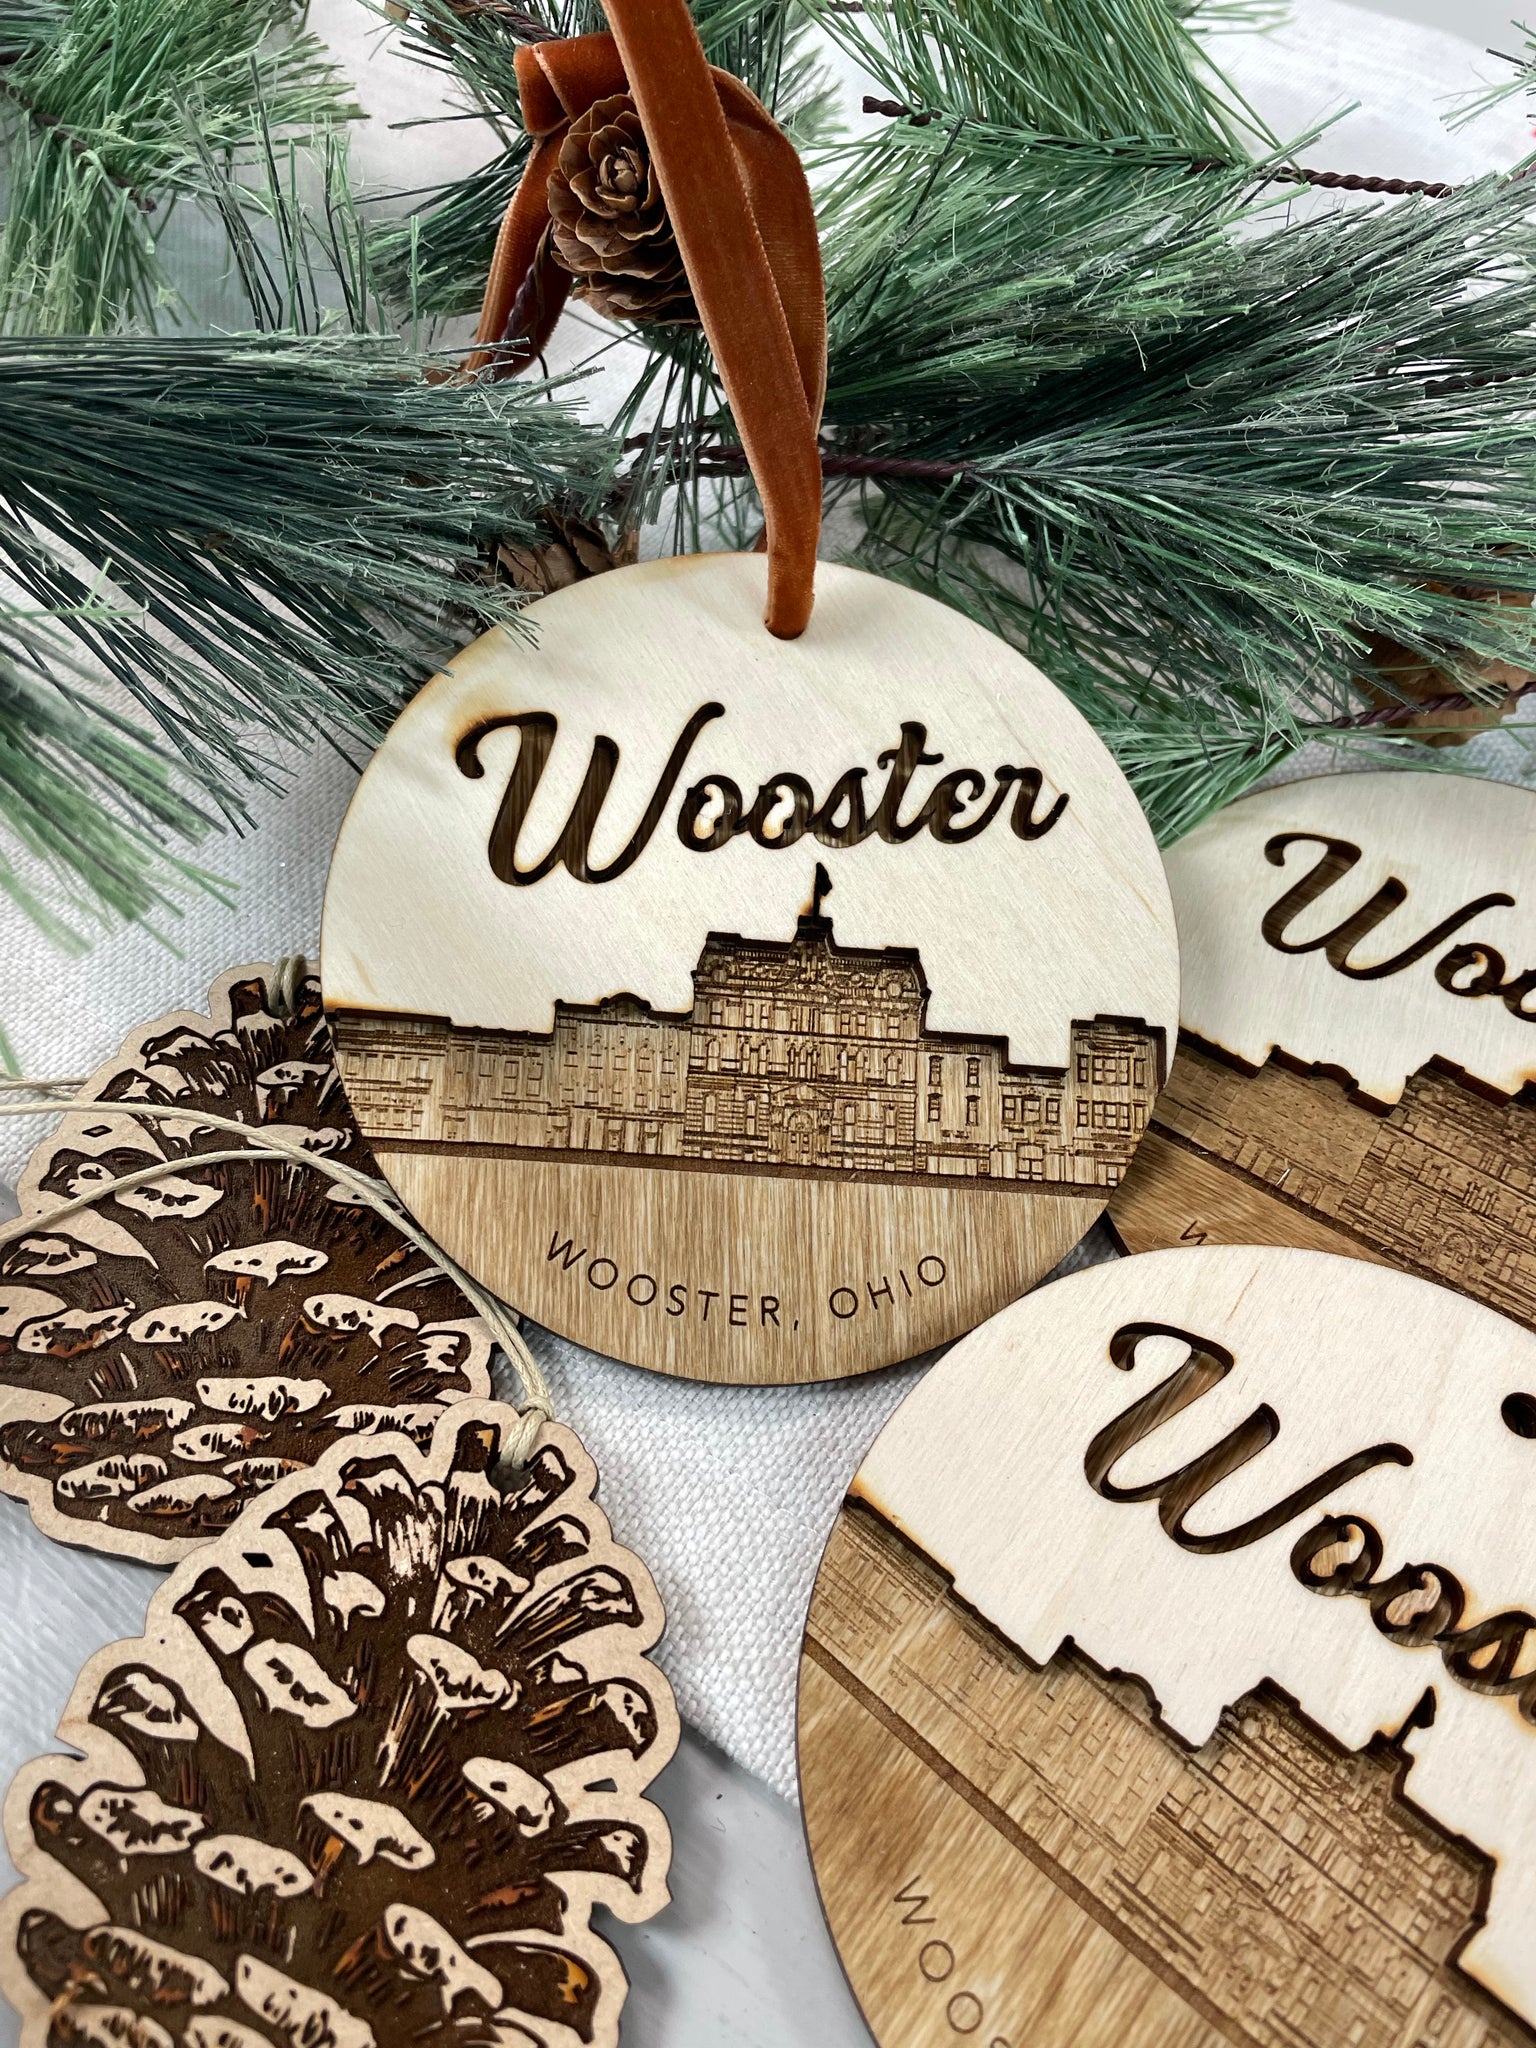 Wooster Ohio My town ornament